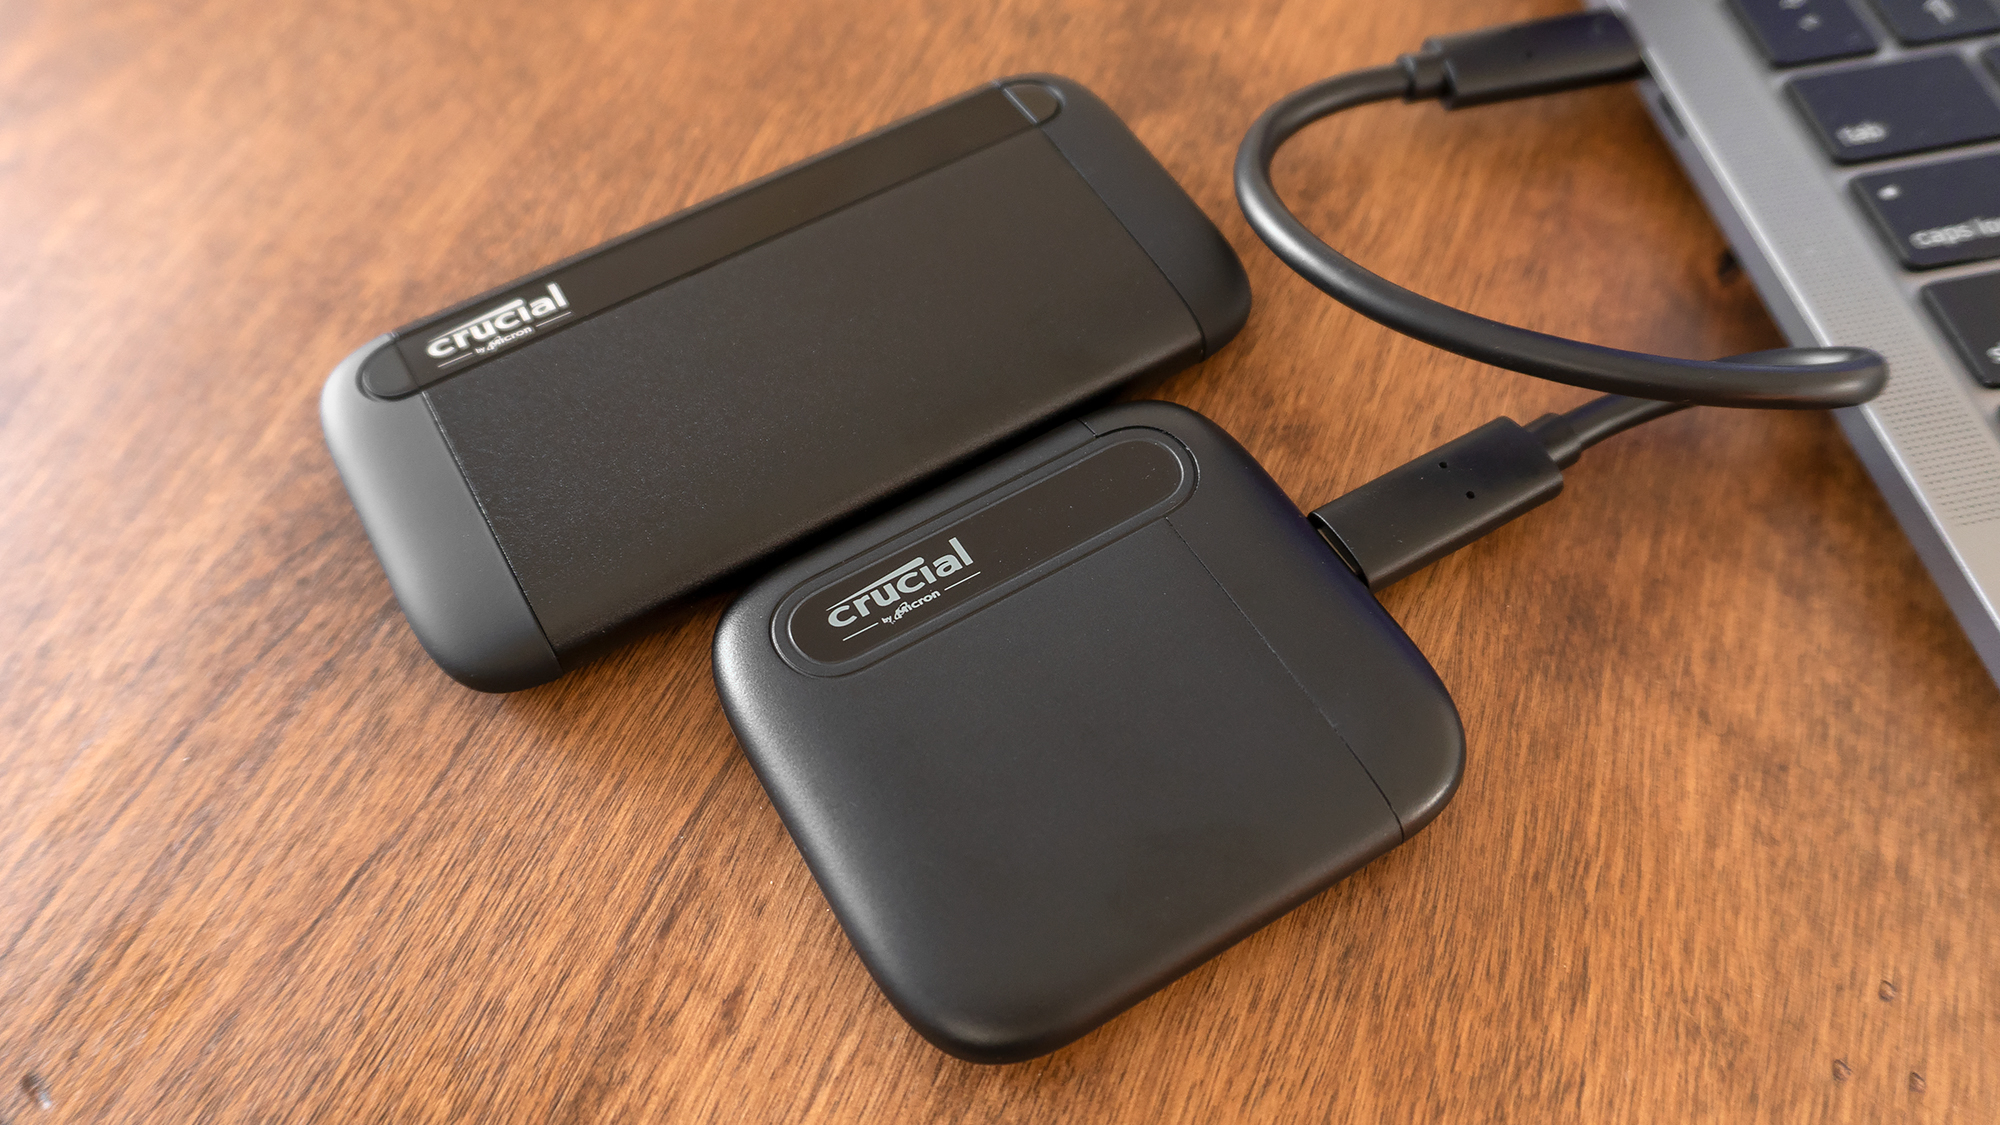 If the X6 line isn't fast enough for your needs, Crucial's X8 portable SSD line boosts read speeds to 1,050 MB/s. (Photo: Andrew Liszewski - Gizmodo)